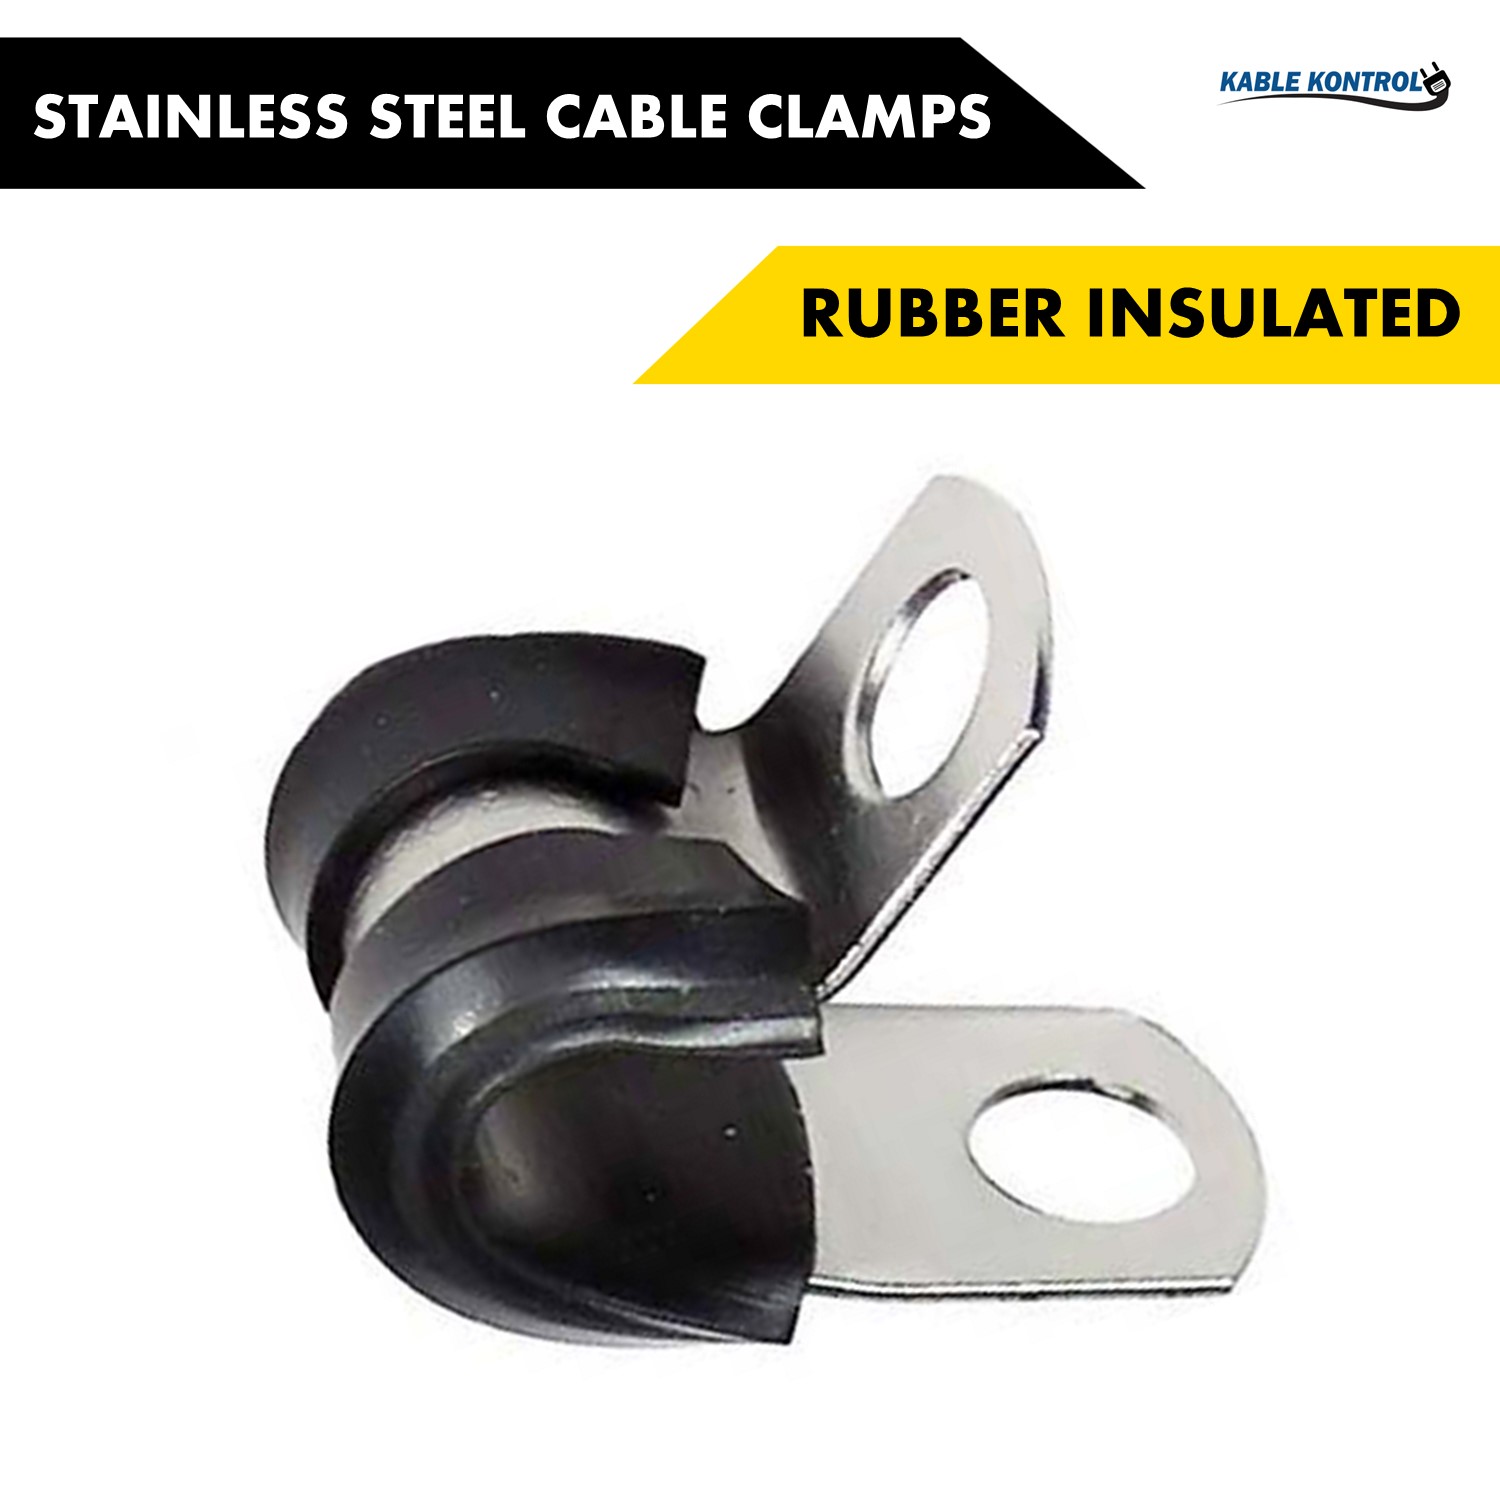 Stainless Steel Cable Clamps  Rubber Insulated Cable Clamps